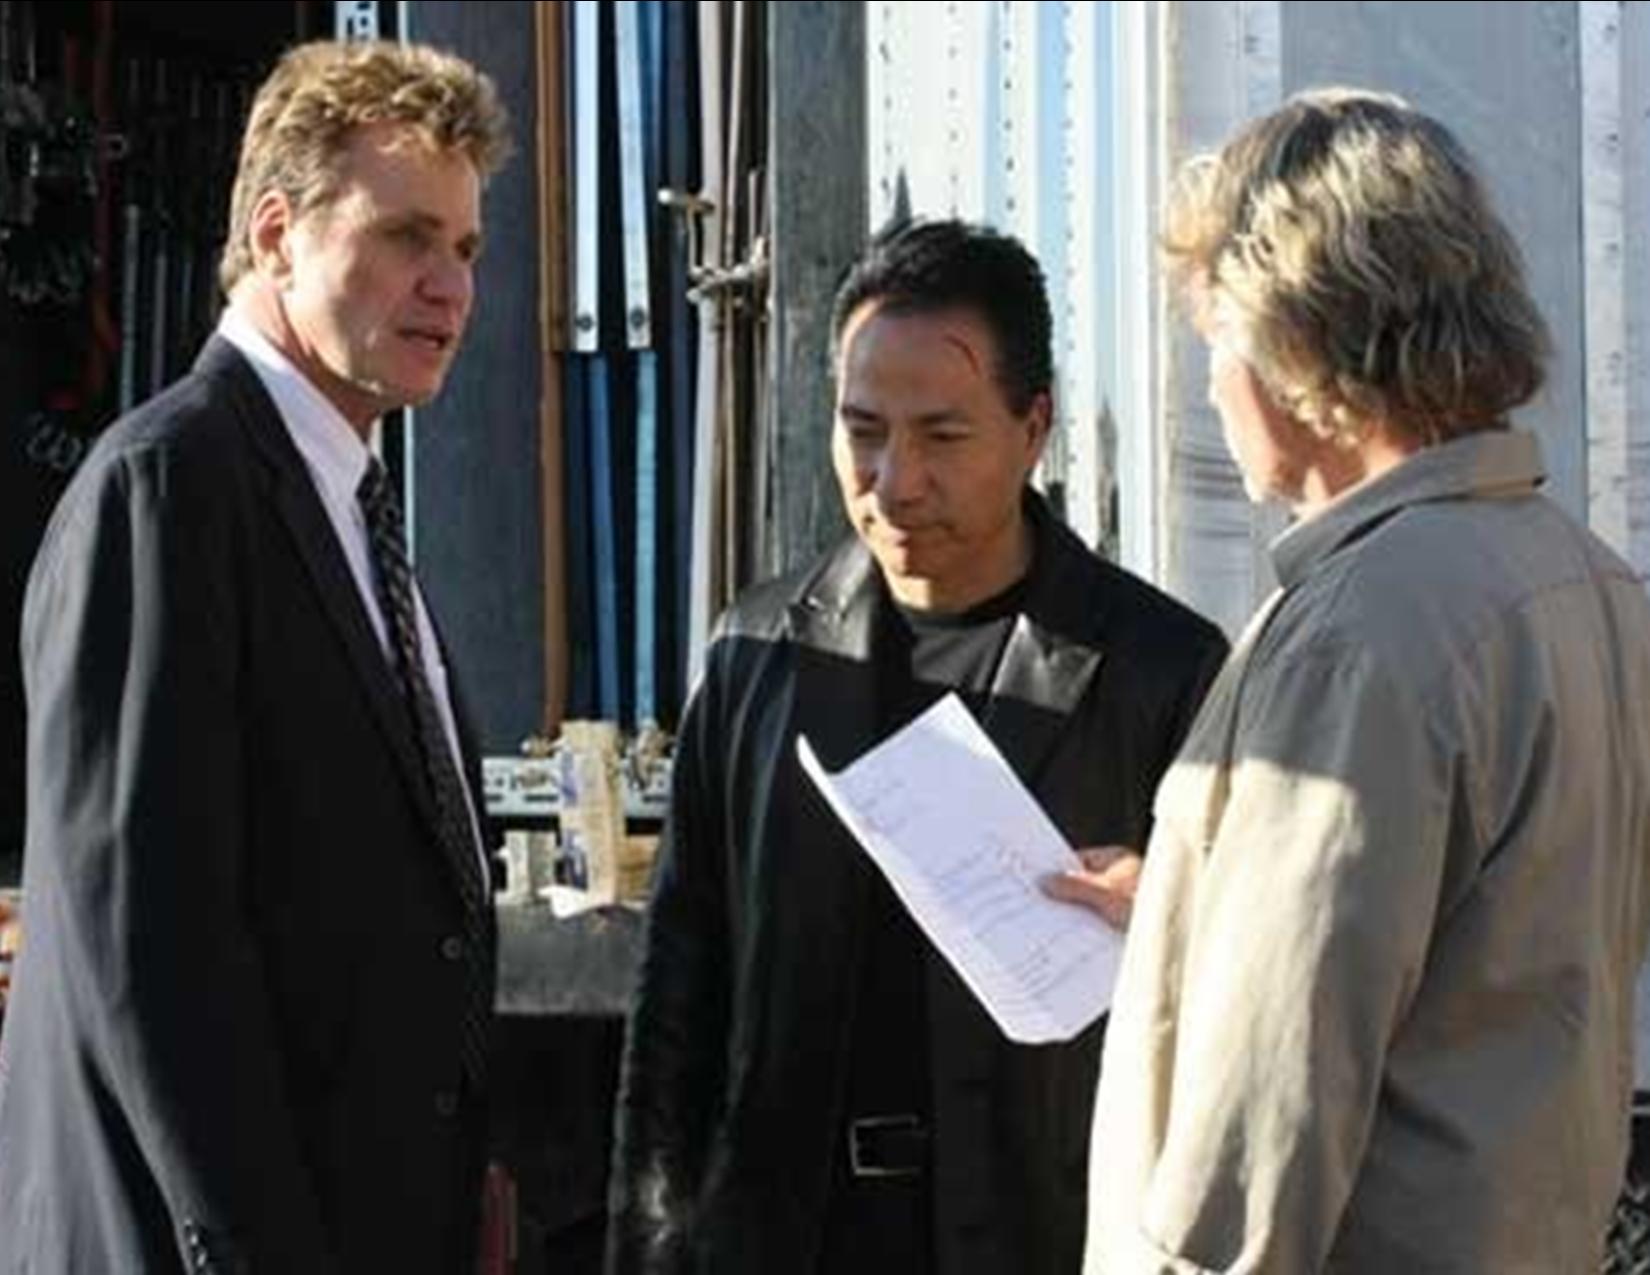 Julian Lee reviewing dialogue with Martin Kove (The Karate Kid) and John Savage (The Deer Hunter) on the set of 